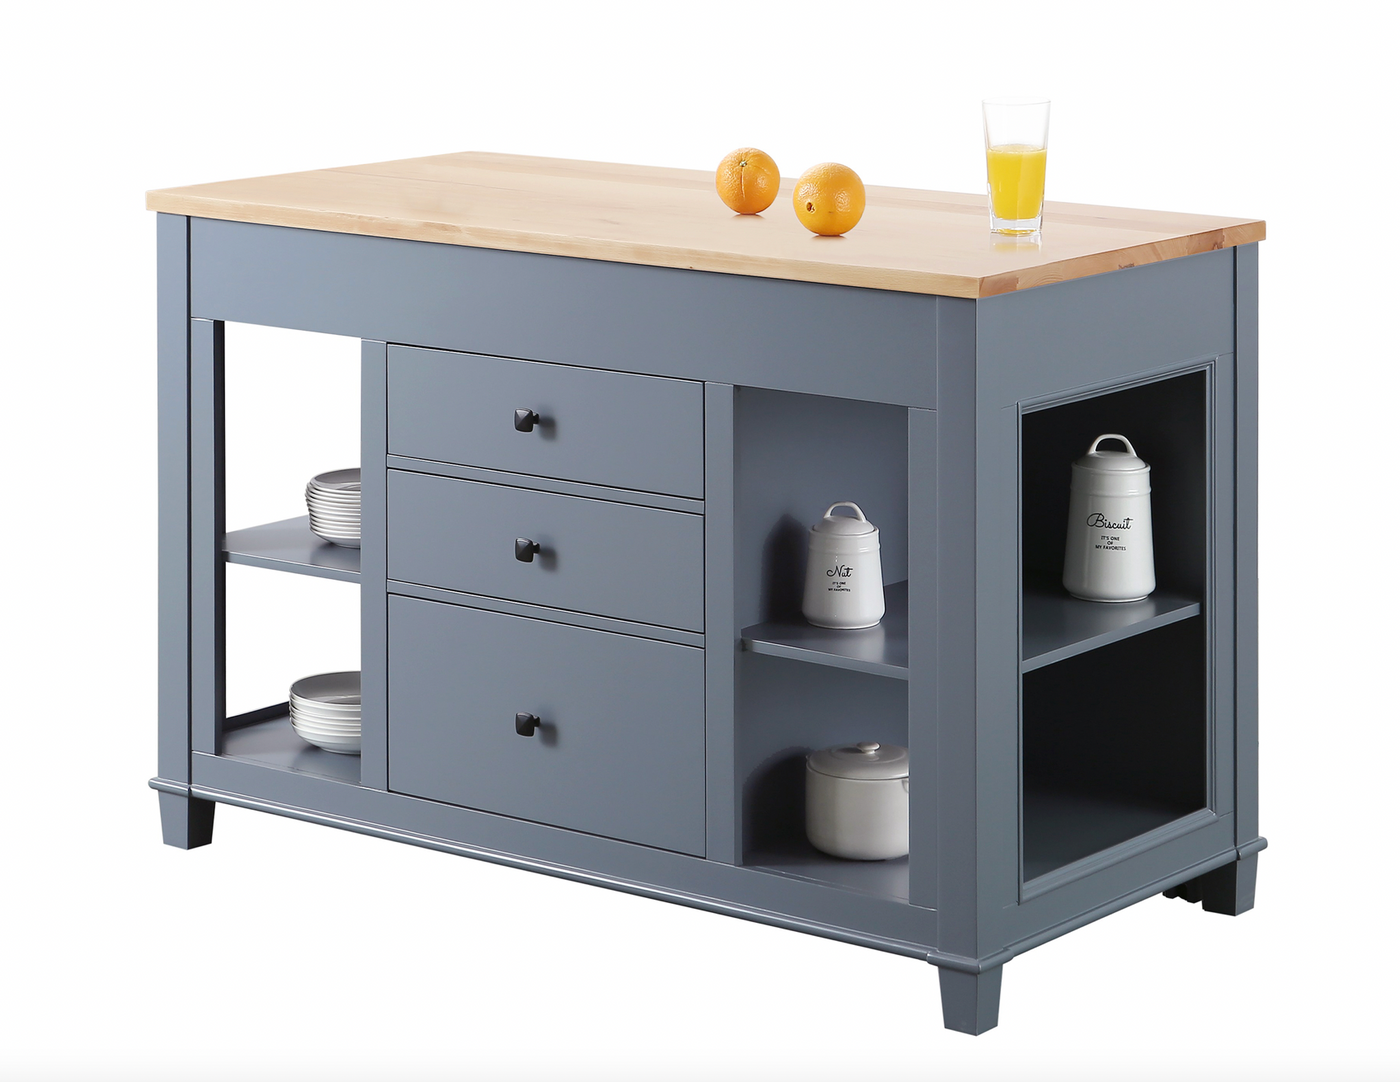 Design Element Medley 54 In. Kitchen Island With Slide Out Table - Gray KD-01-GY